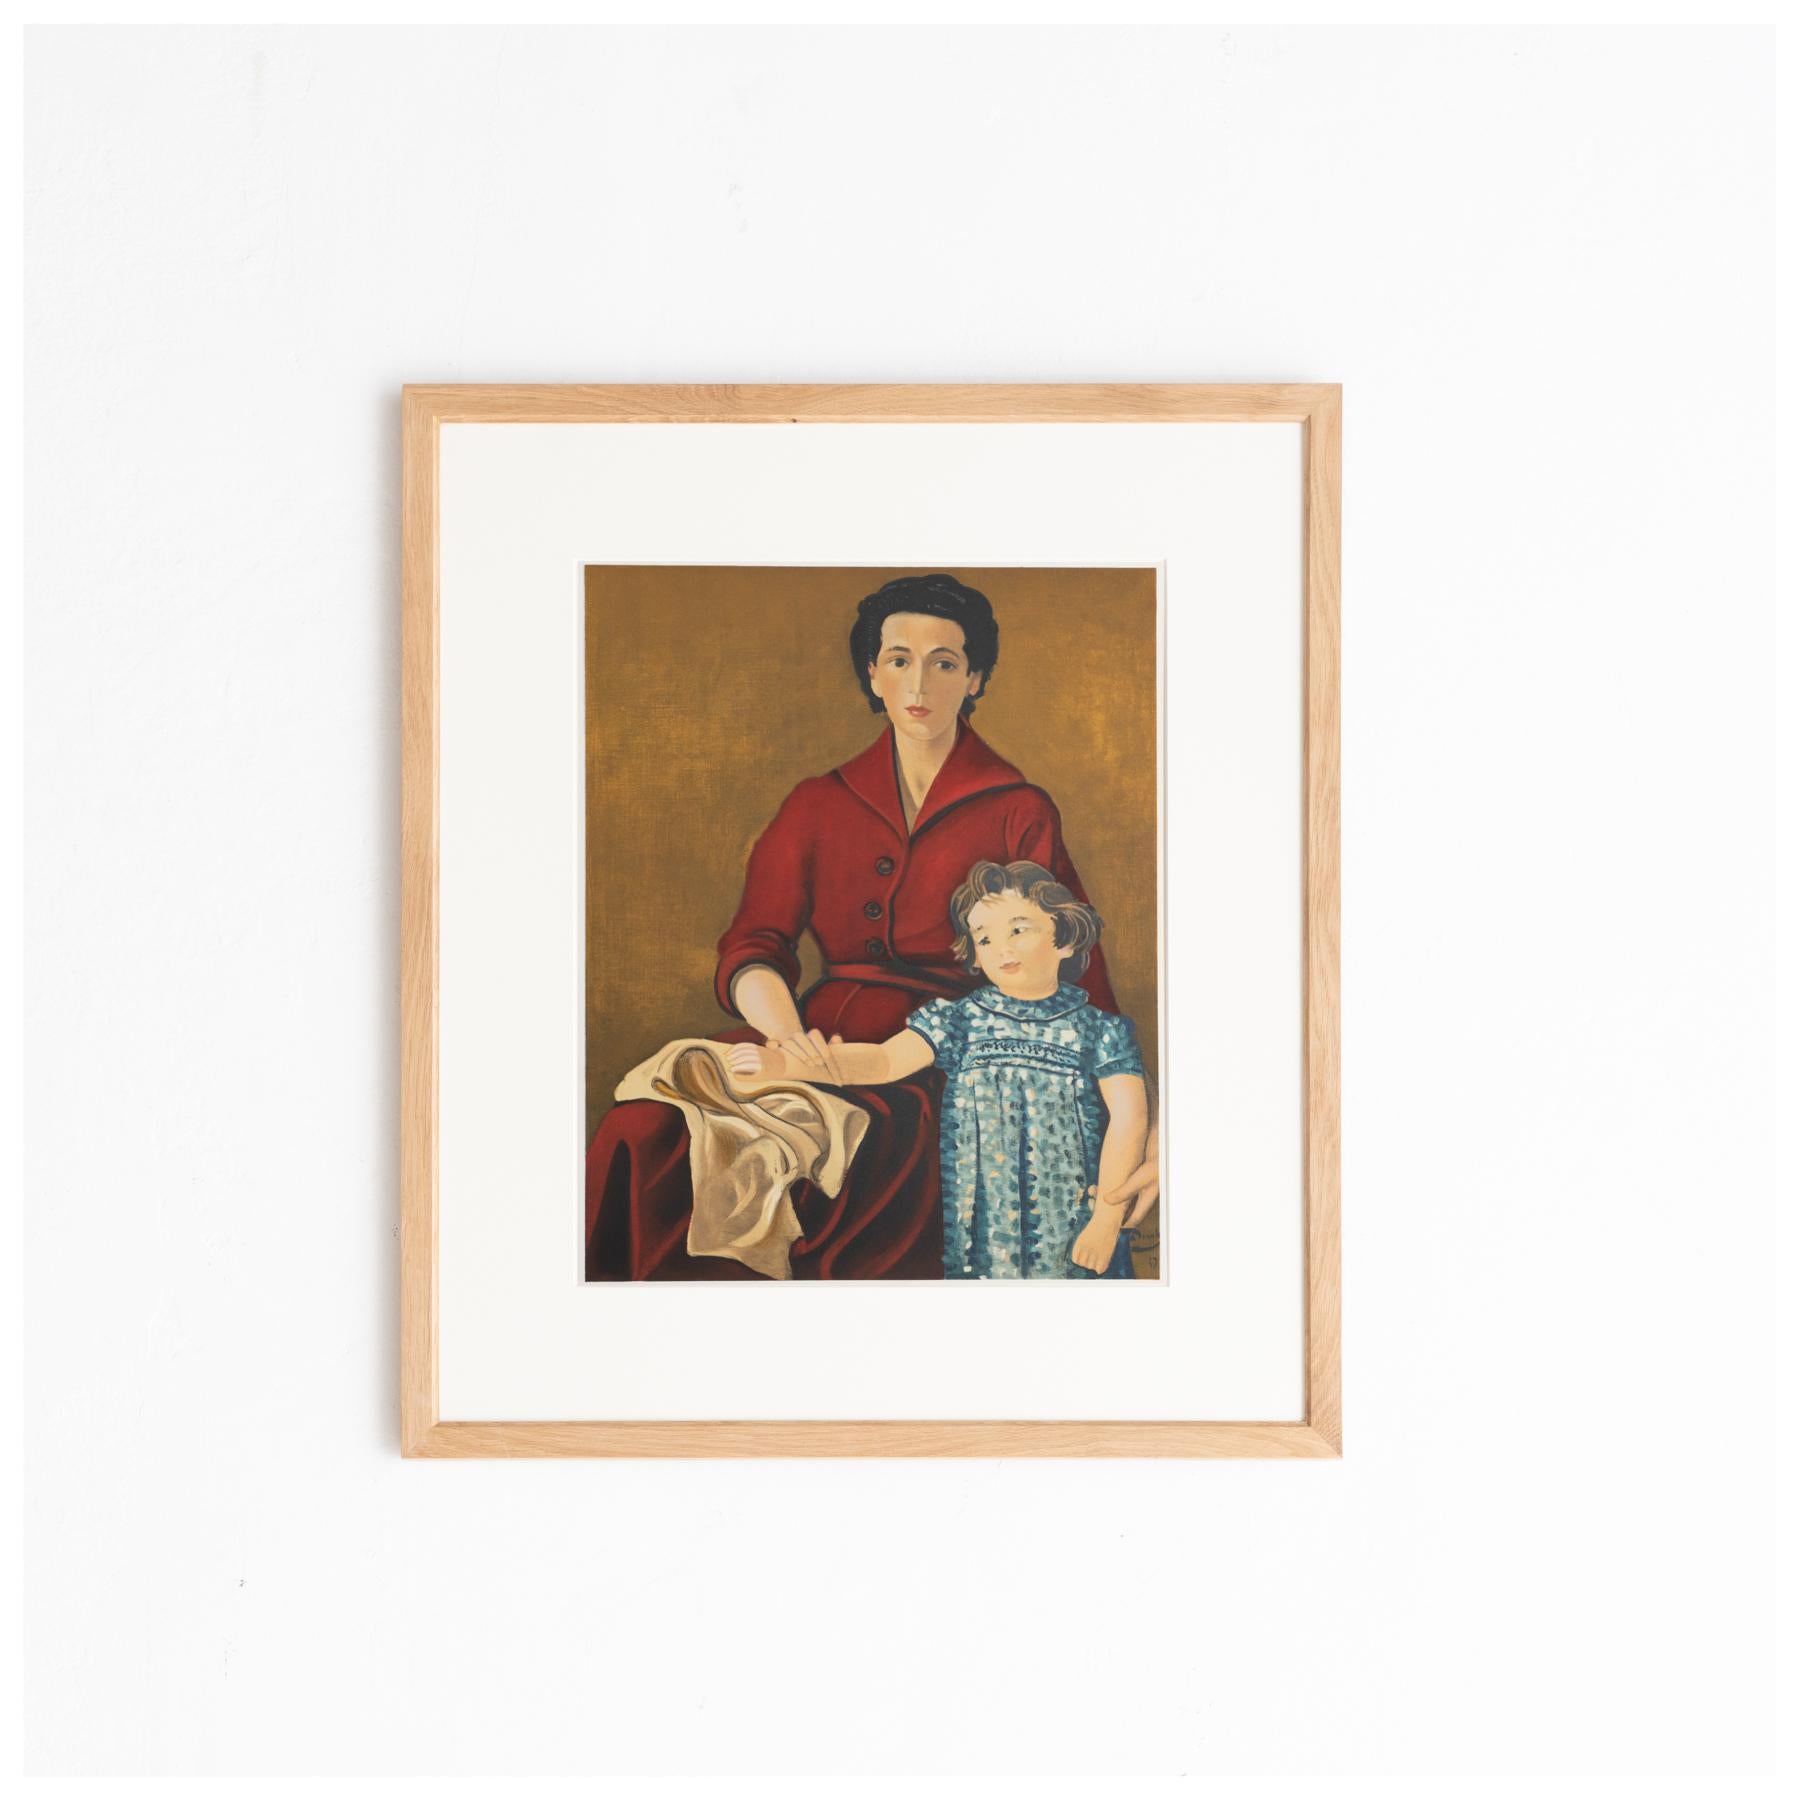 Original 'Portrait de Denise et Claire' color lithograph by André Derain.

Lithograph printed from an original painting made by the author in France, circa 1949.

Published by Mourlot in Collection Pierre Levy in 1970, Paris. 

Framed and